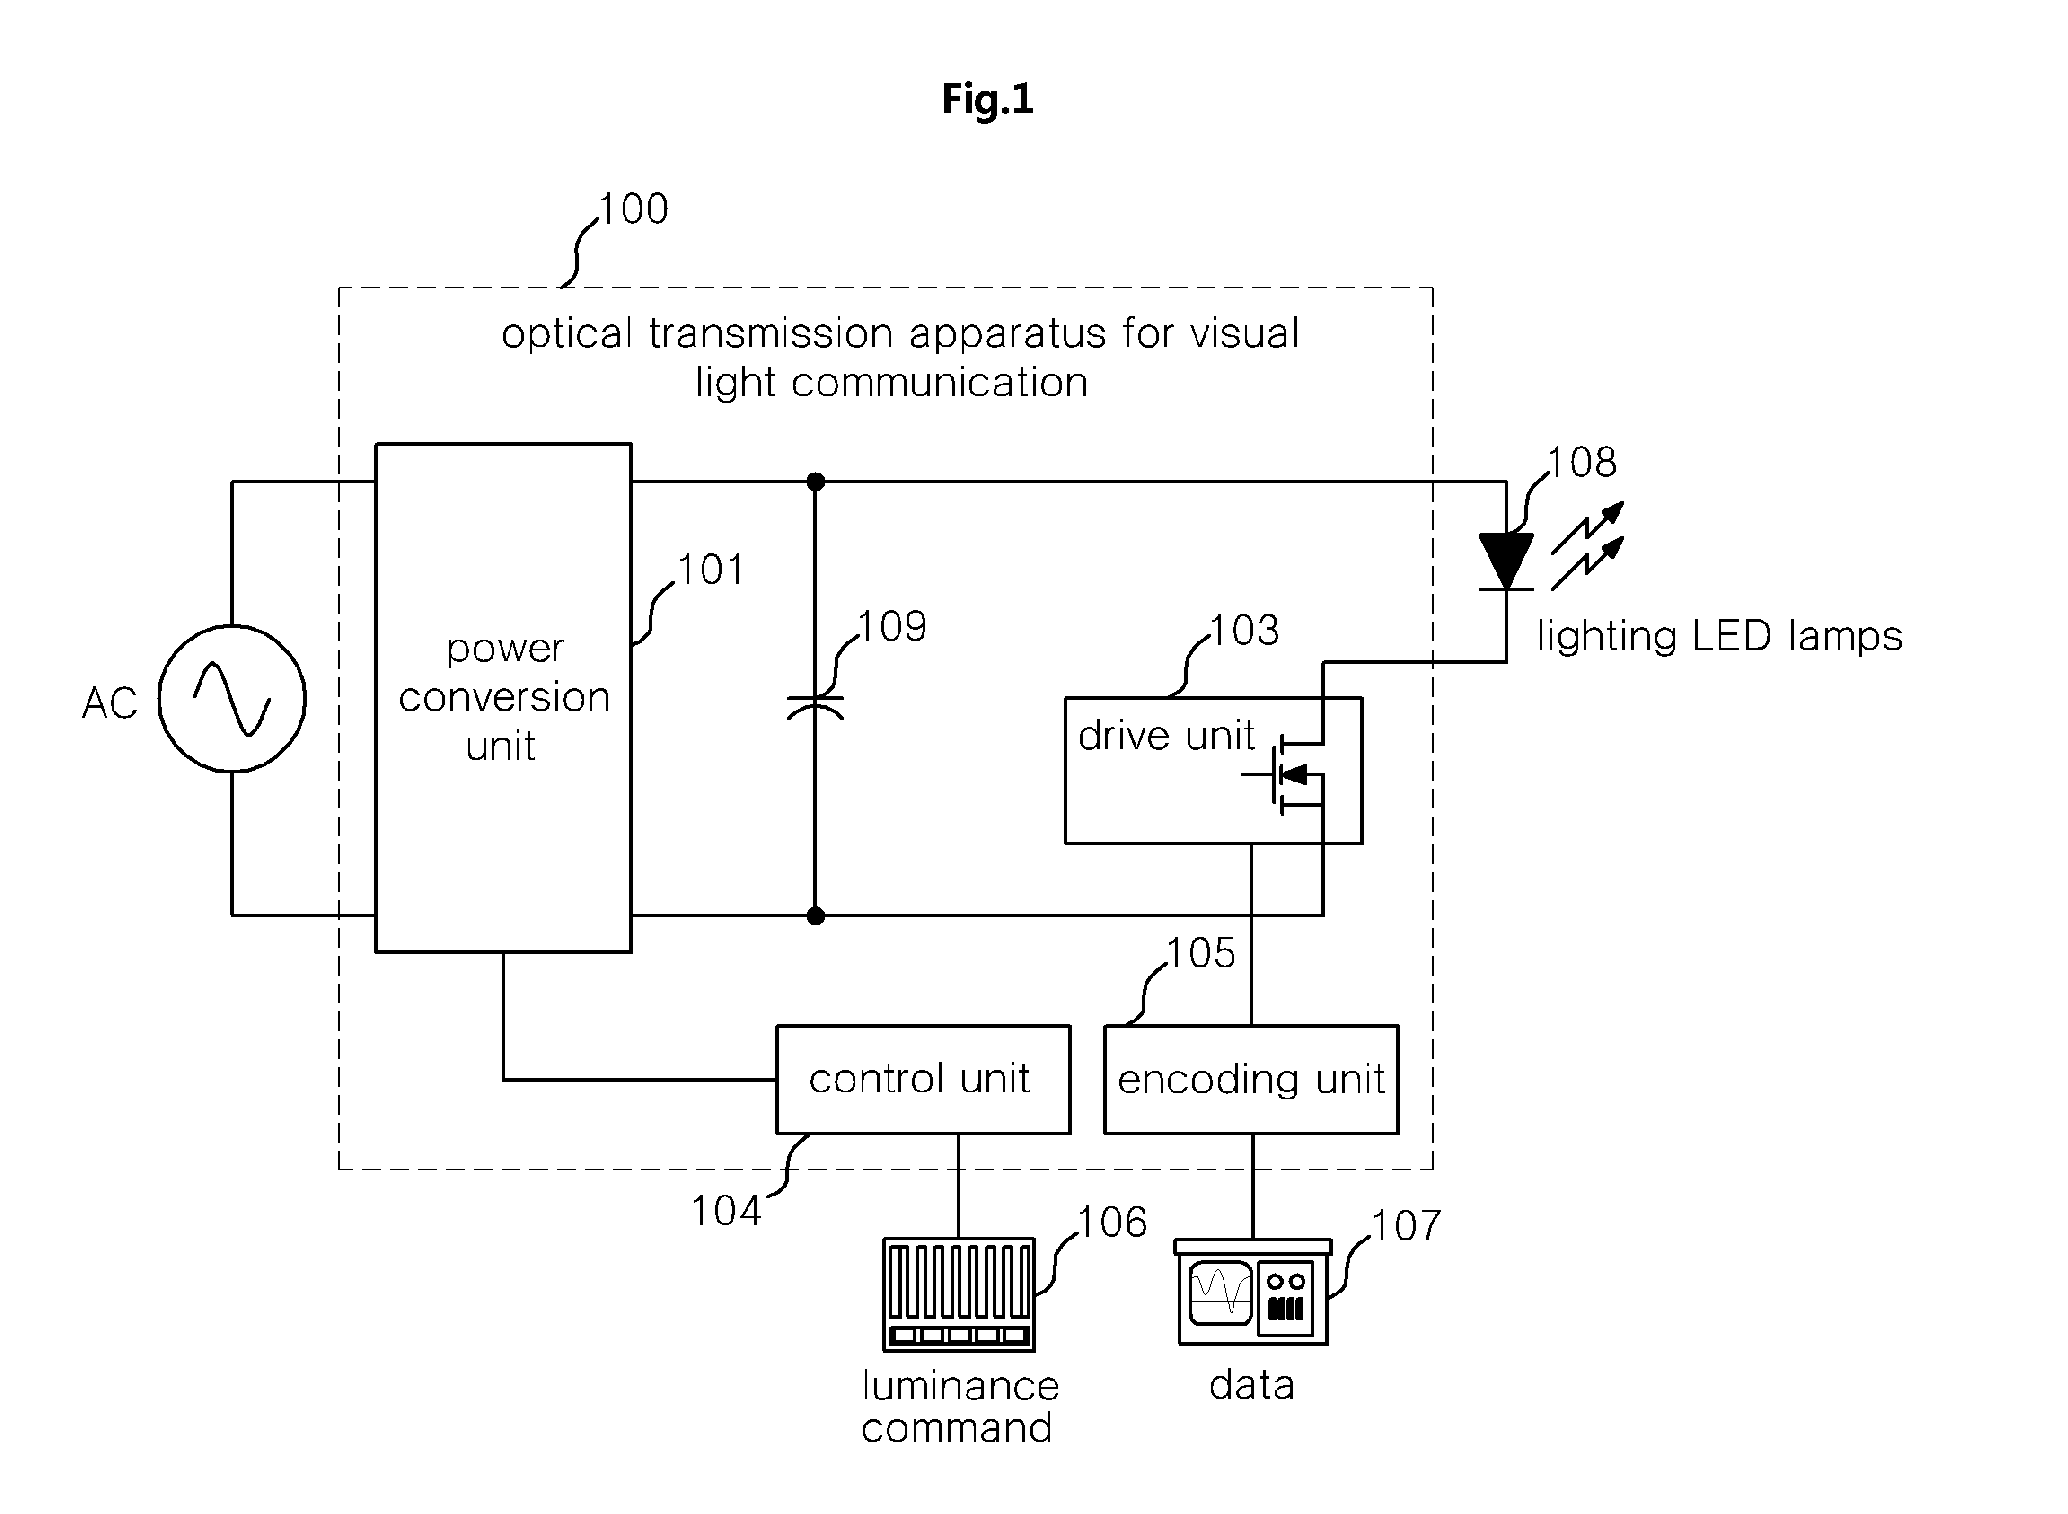 Optical transmission apparatus for visible light communication